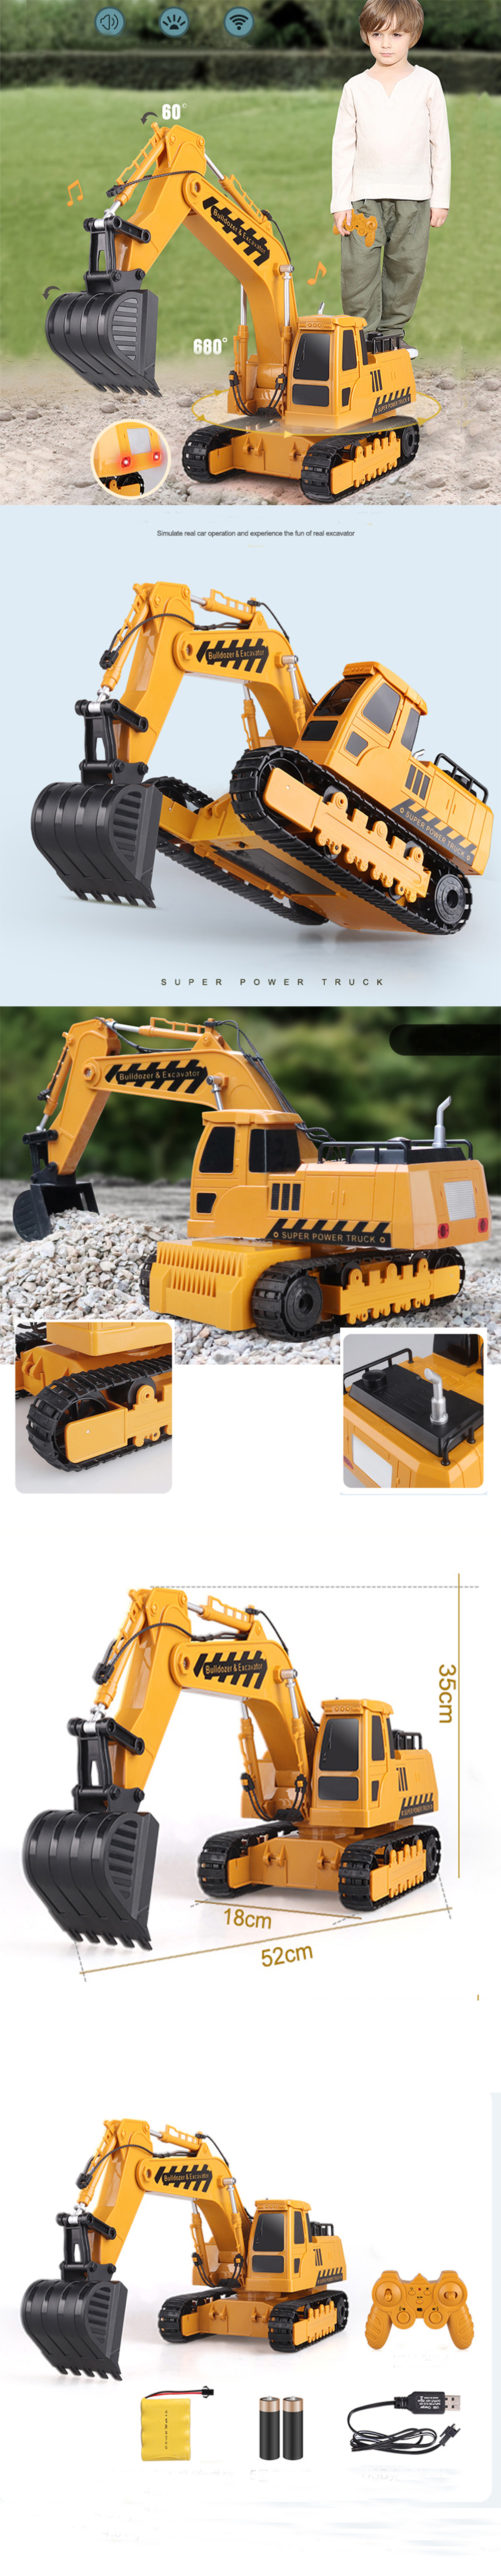 1:14 Remote Control RC Excavator Construction Vehicle With Lights and Sounds - Construction Vehicles - 1